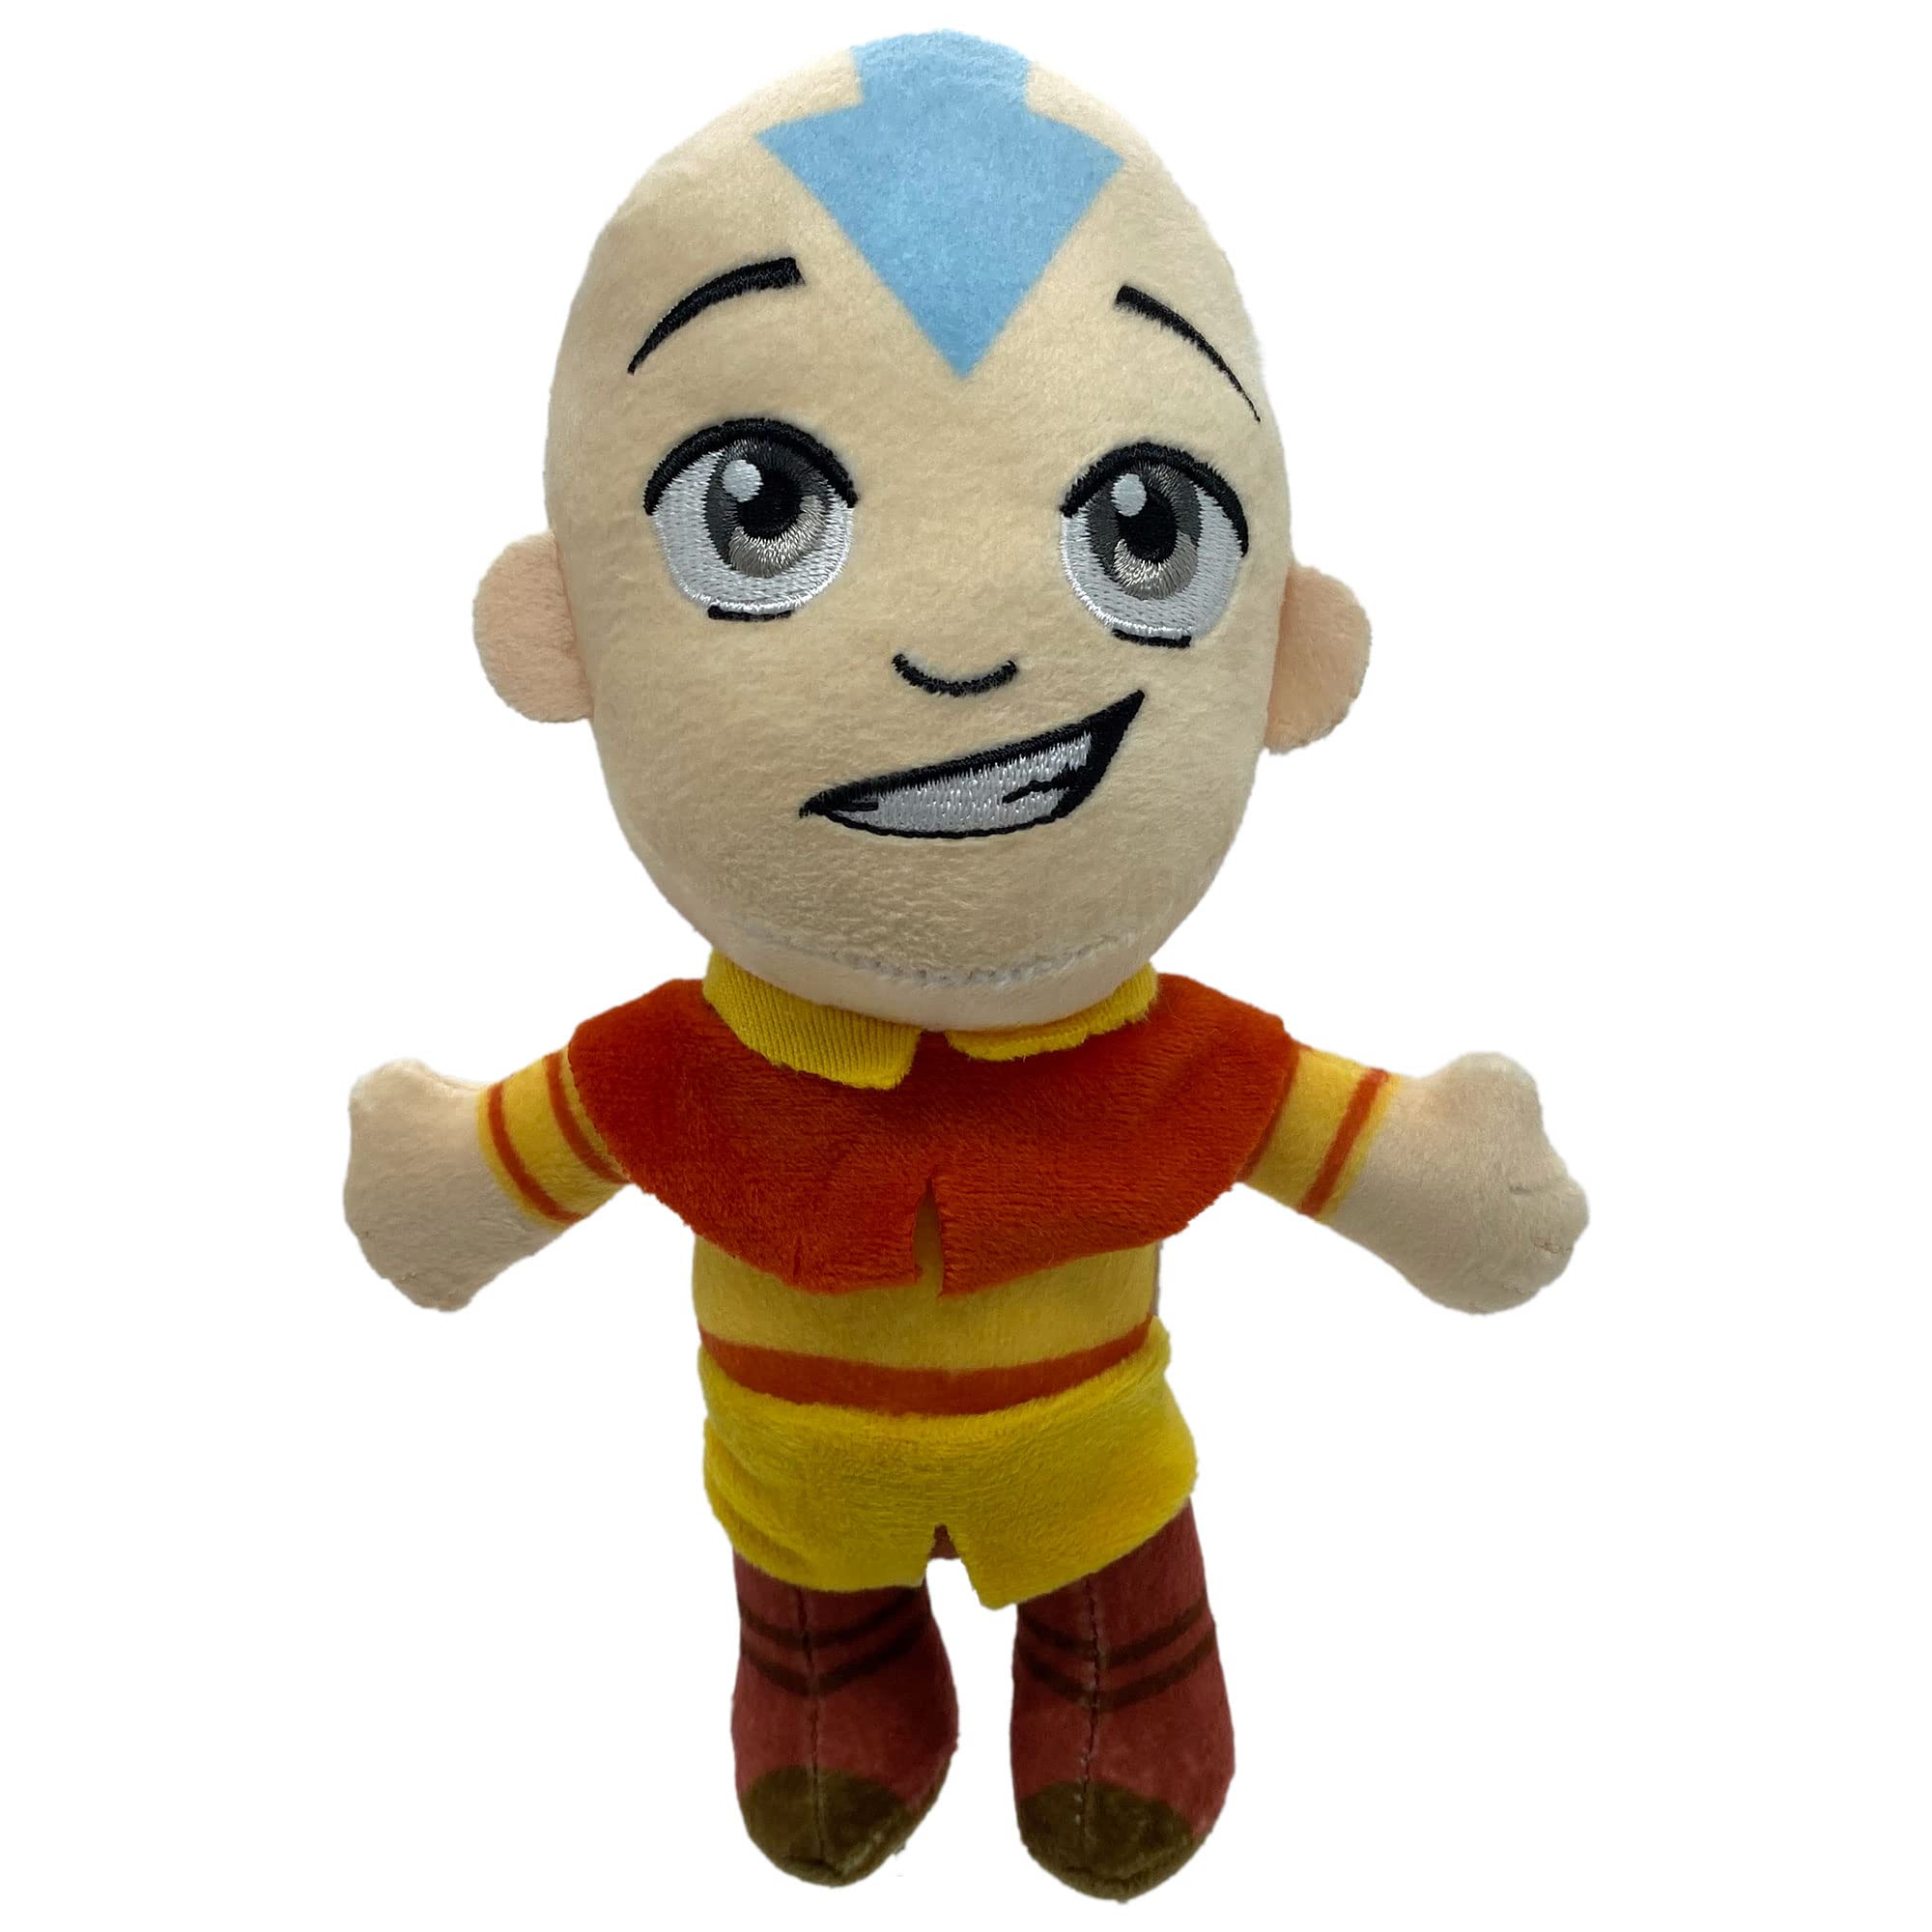 JINX Avatar: The Last Airbender Aang Small Plush Toy, 7.5-in Stuffed Figure from Nickelodeon TV Series for Fans of All Ages